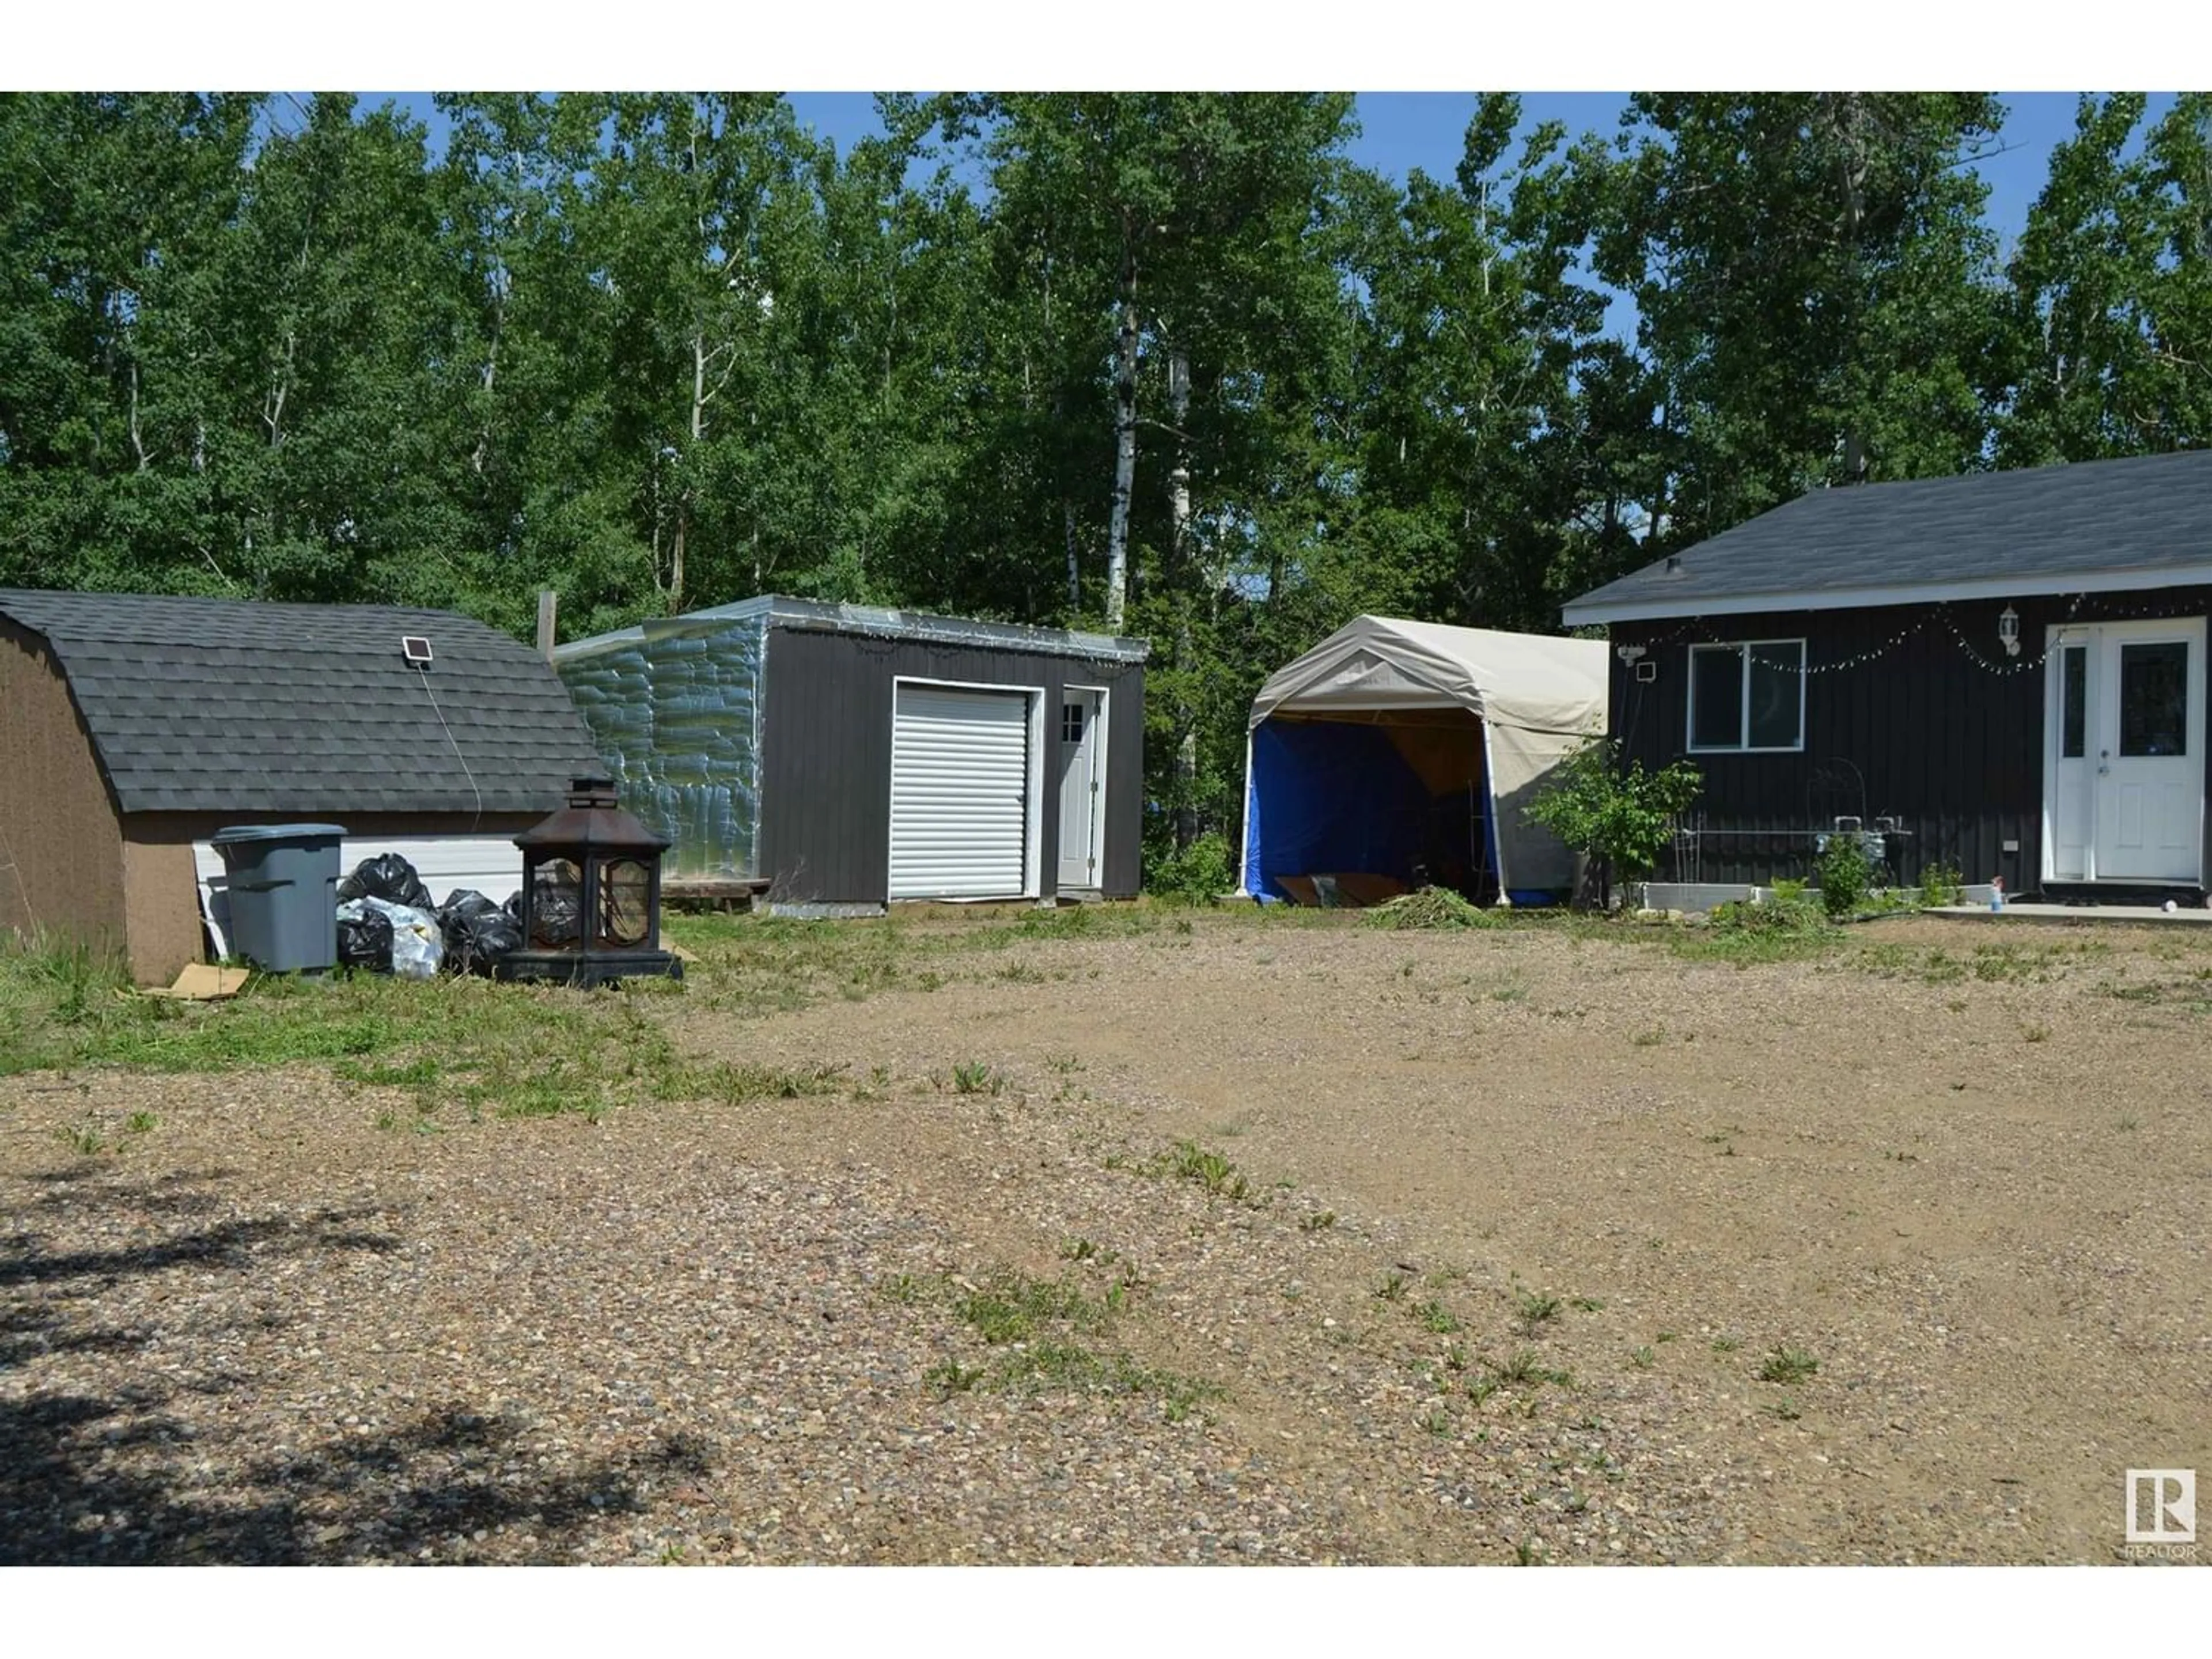 Shed for #4 60203 Range Road 164, Rural Smoky Lake County Alberta T0A3C0